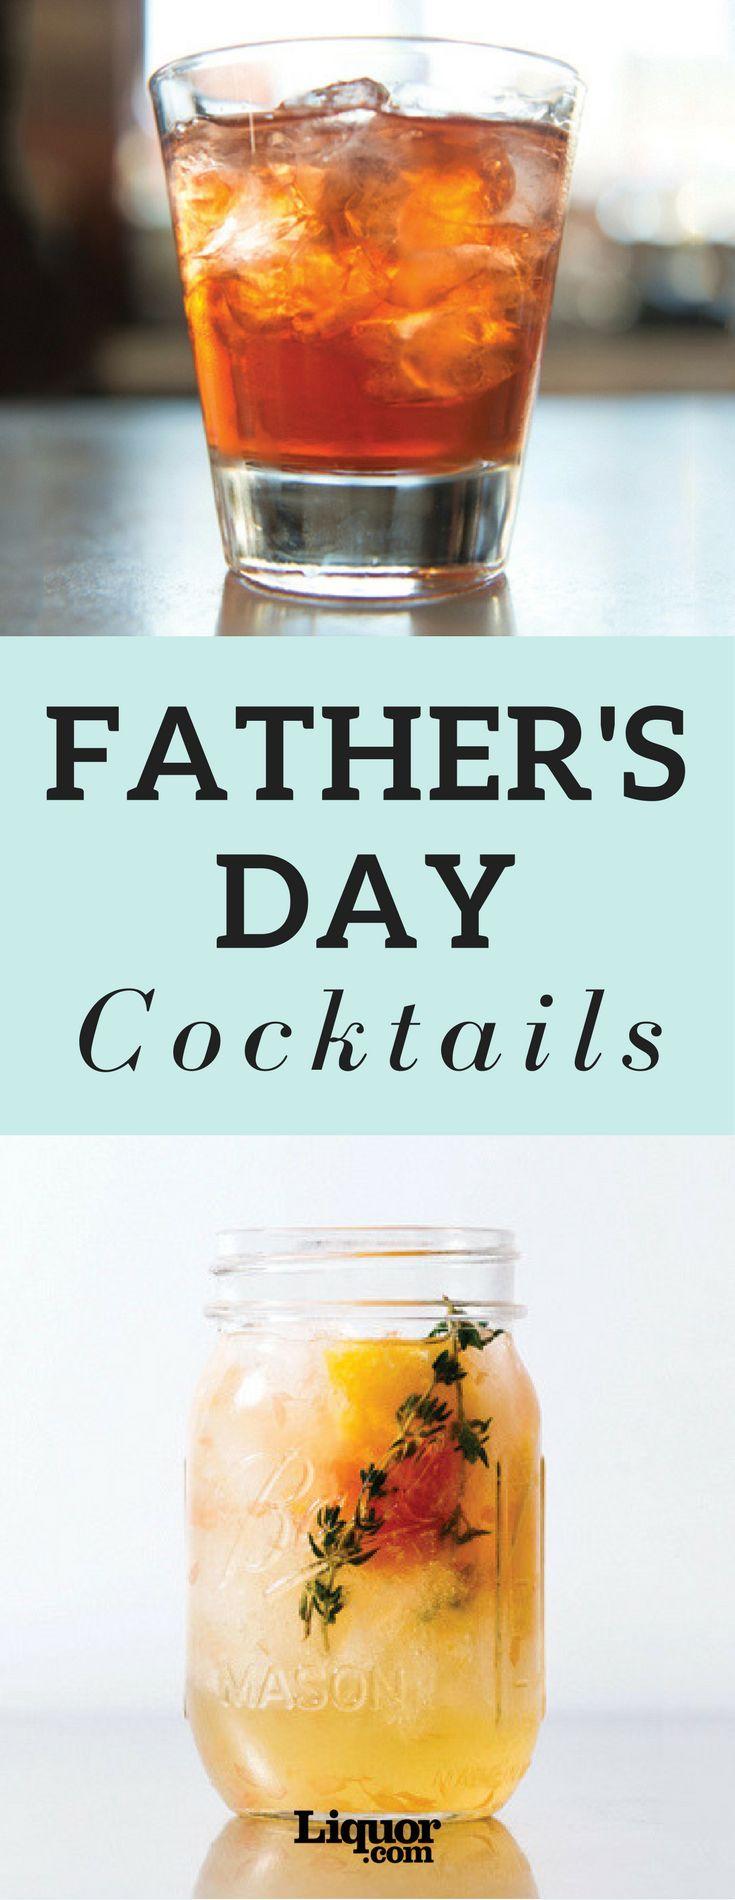 Hochzeit - 8 Essential Cocktails For Father’s Day